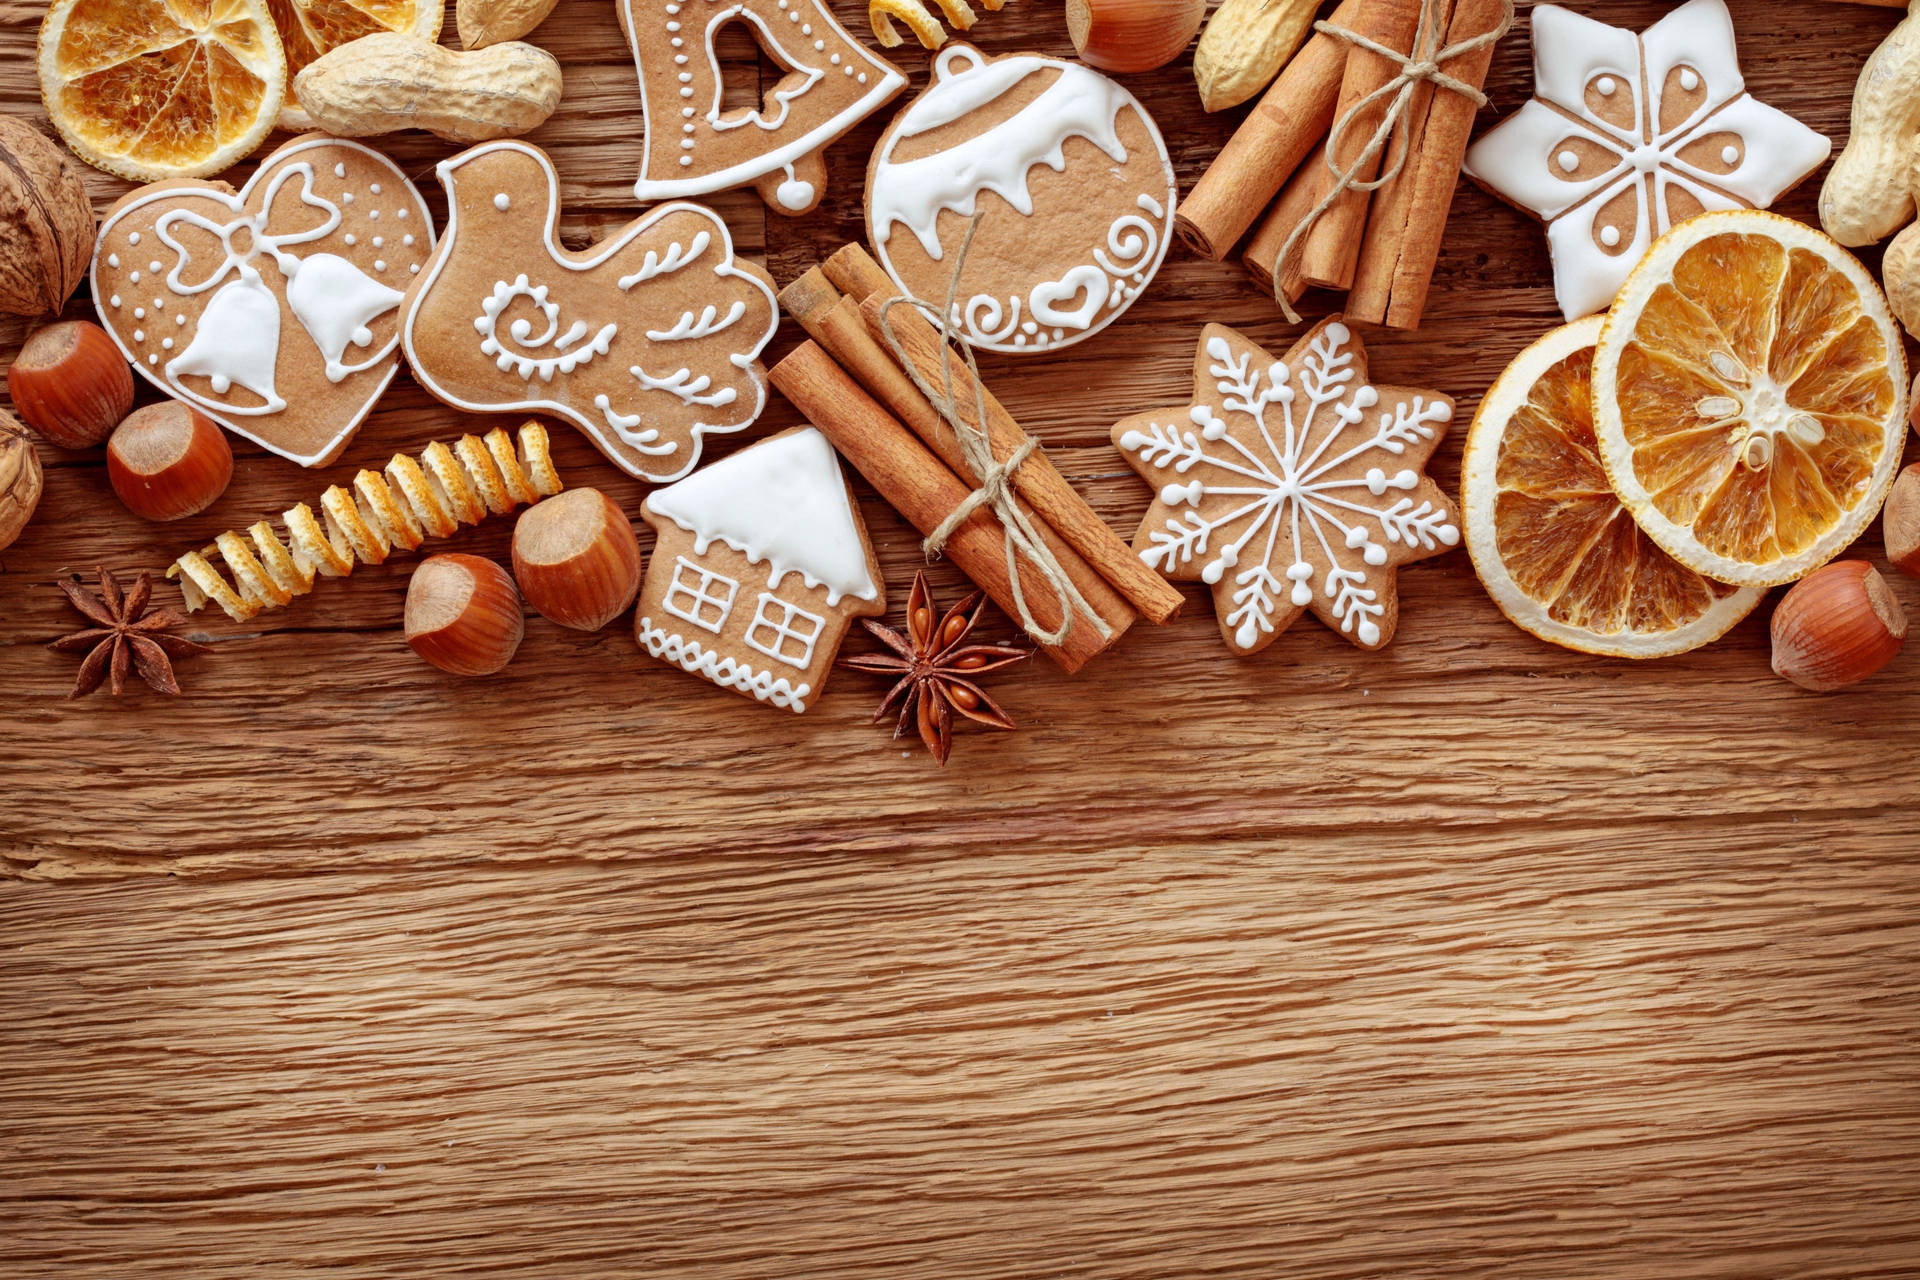 Gingerbread On Wooden Table Background